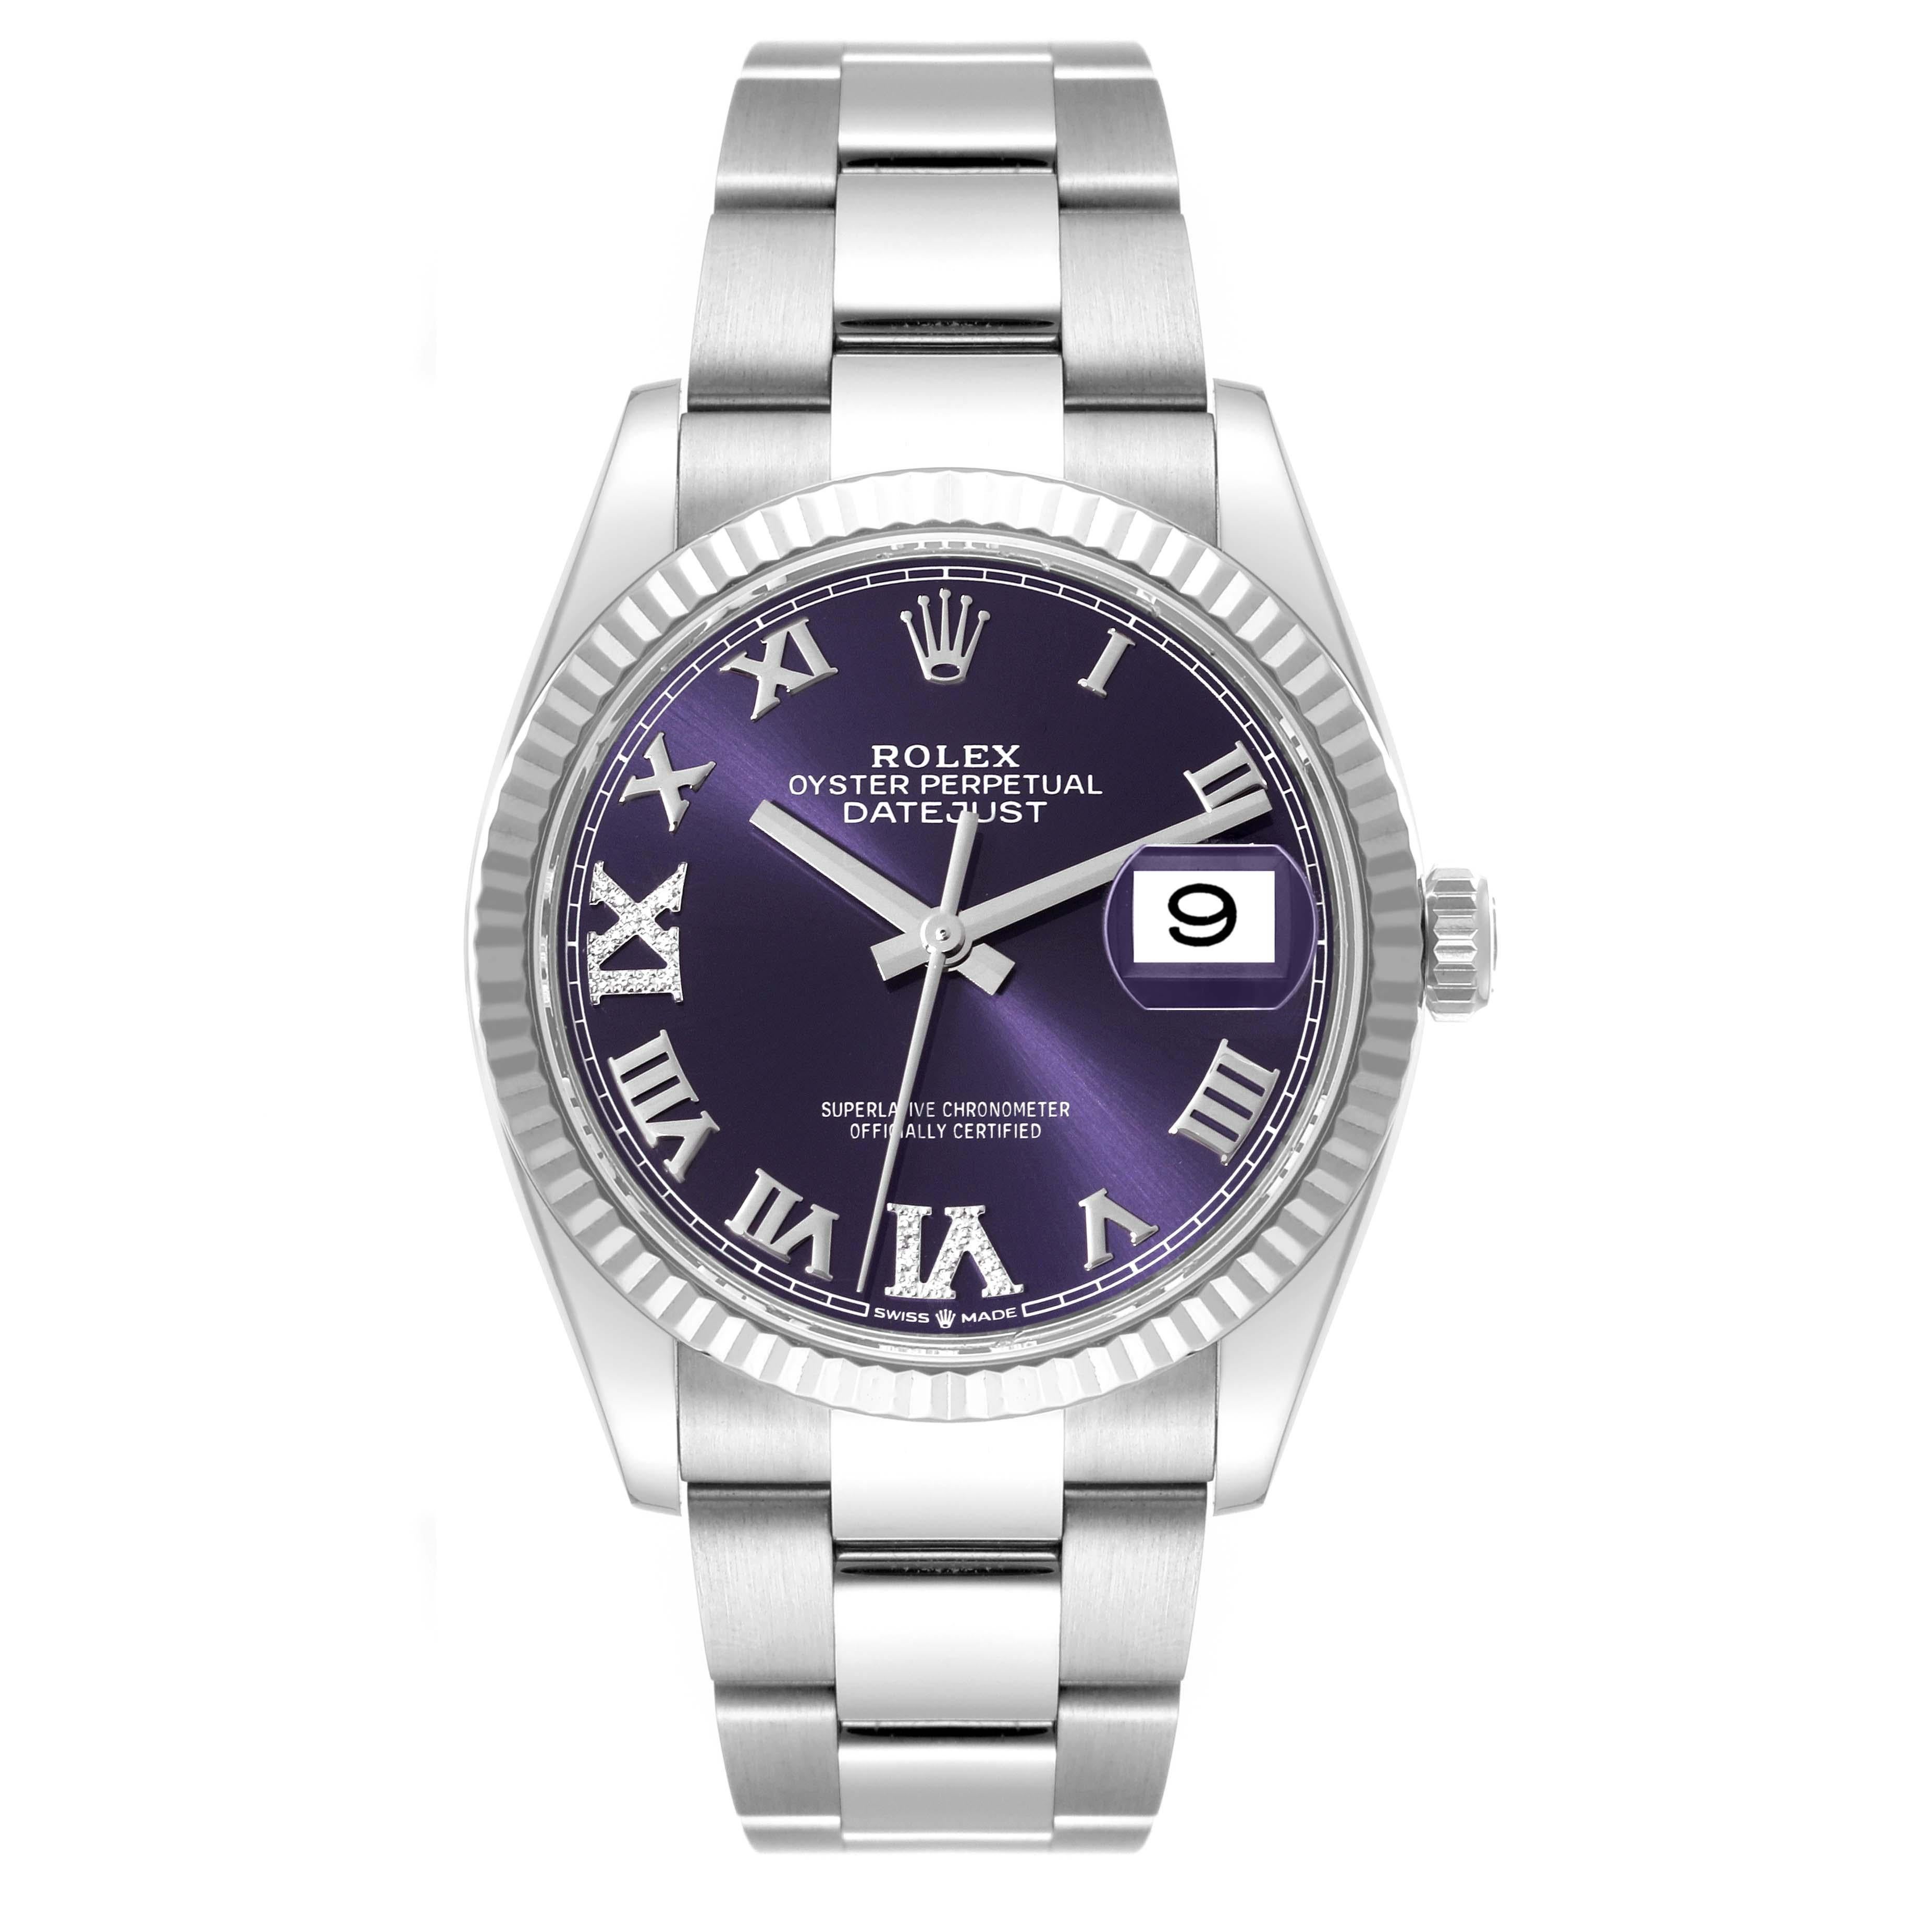 Rolex Datejust Steel White Gold Aubergine Diamond Dial Mens Watch 126234. Officially certified chronometer self-winding movement. Stainless steel case 36.0 mm in diameter.  Rolex logo on a crown. 18K white gold fluted bezel. Scratch resistant